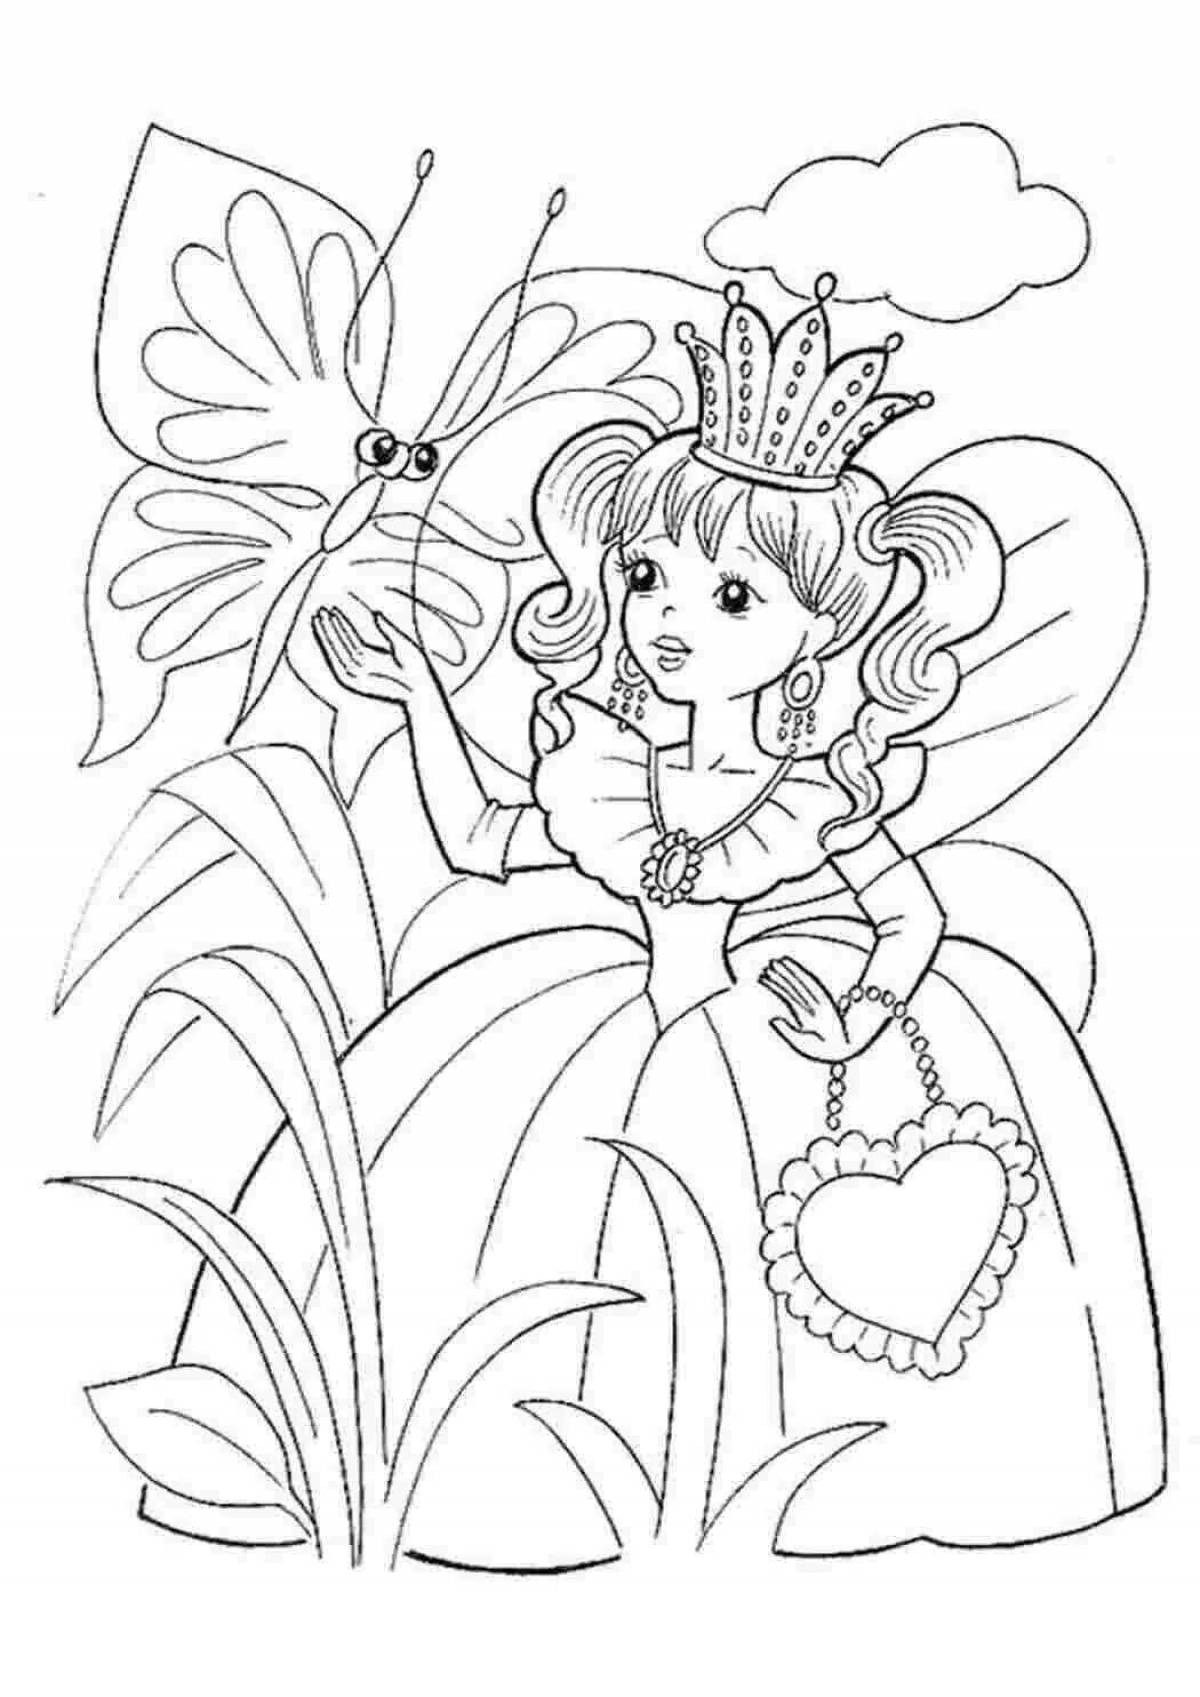 Exotic coloring book for girls princesses 5-6 years old